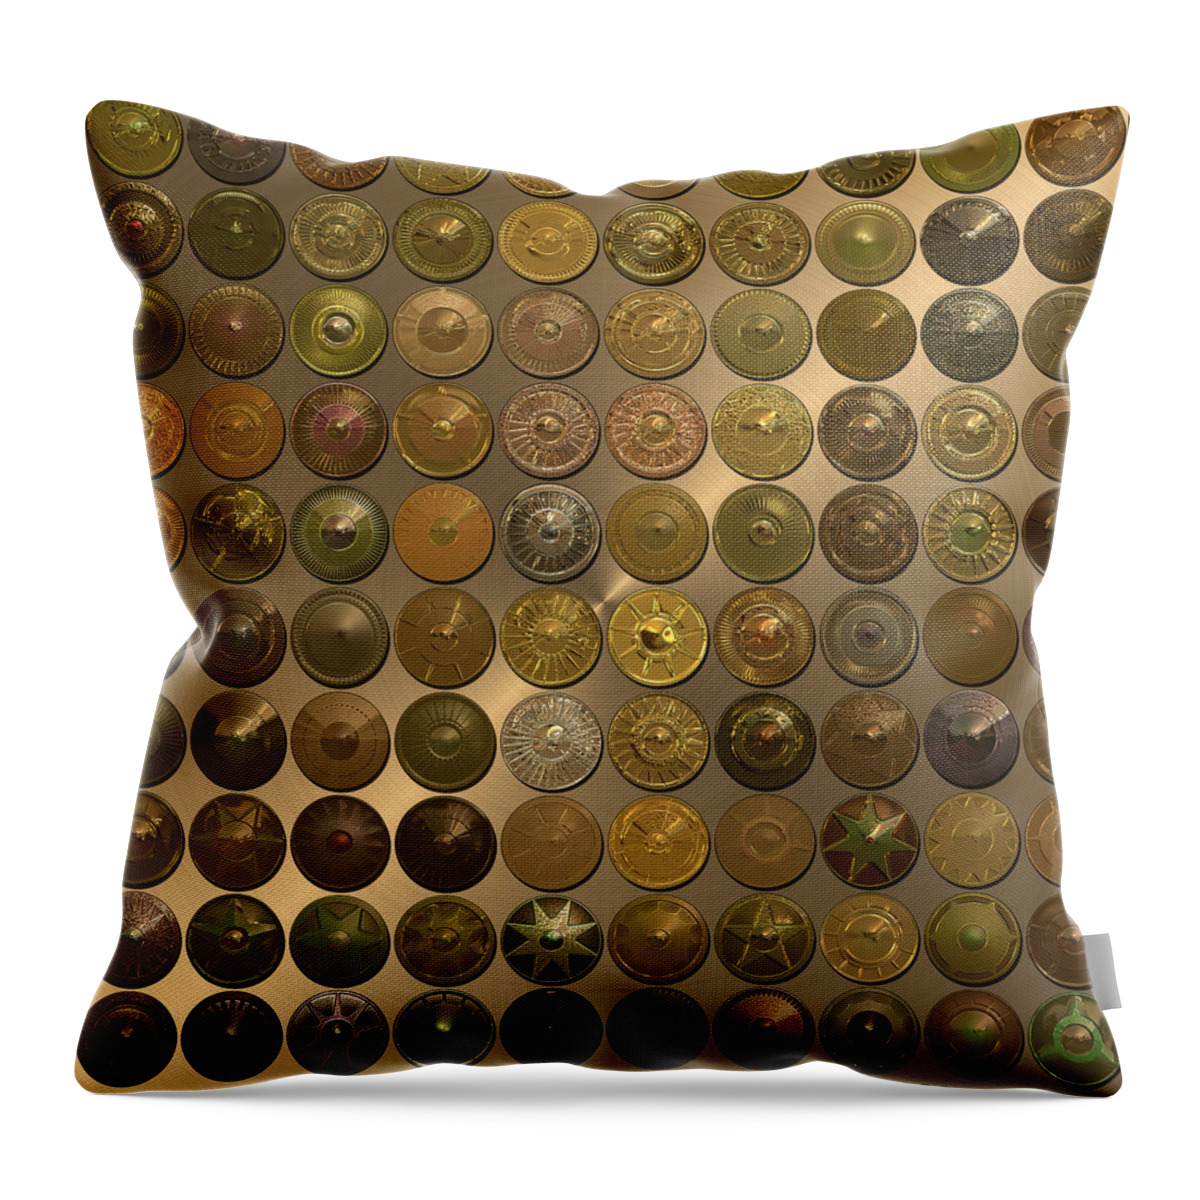 Decorative Throw Pillow featuring the digital art Bronzed Hubcaps by Ann Stretton